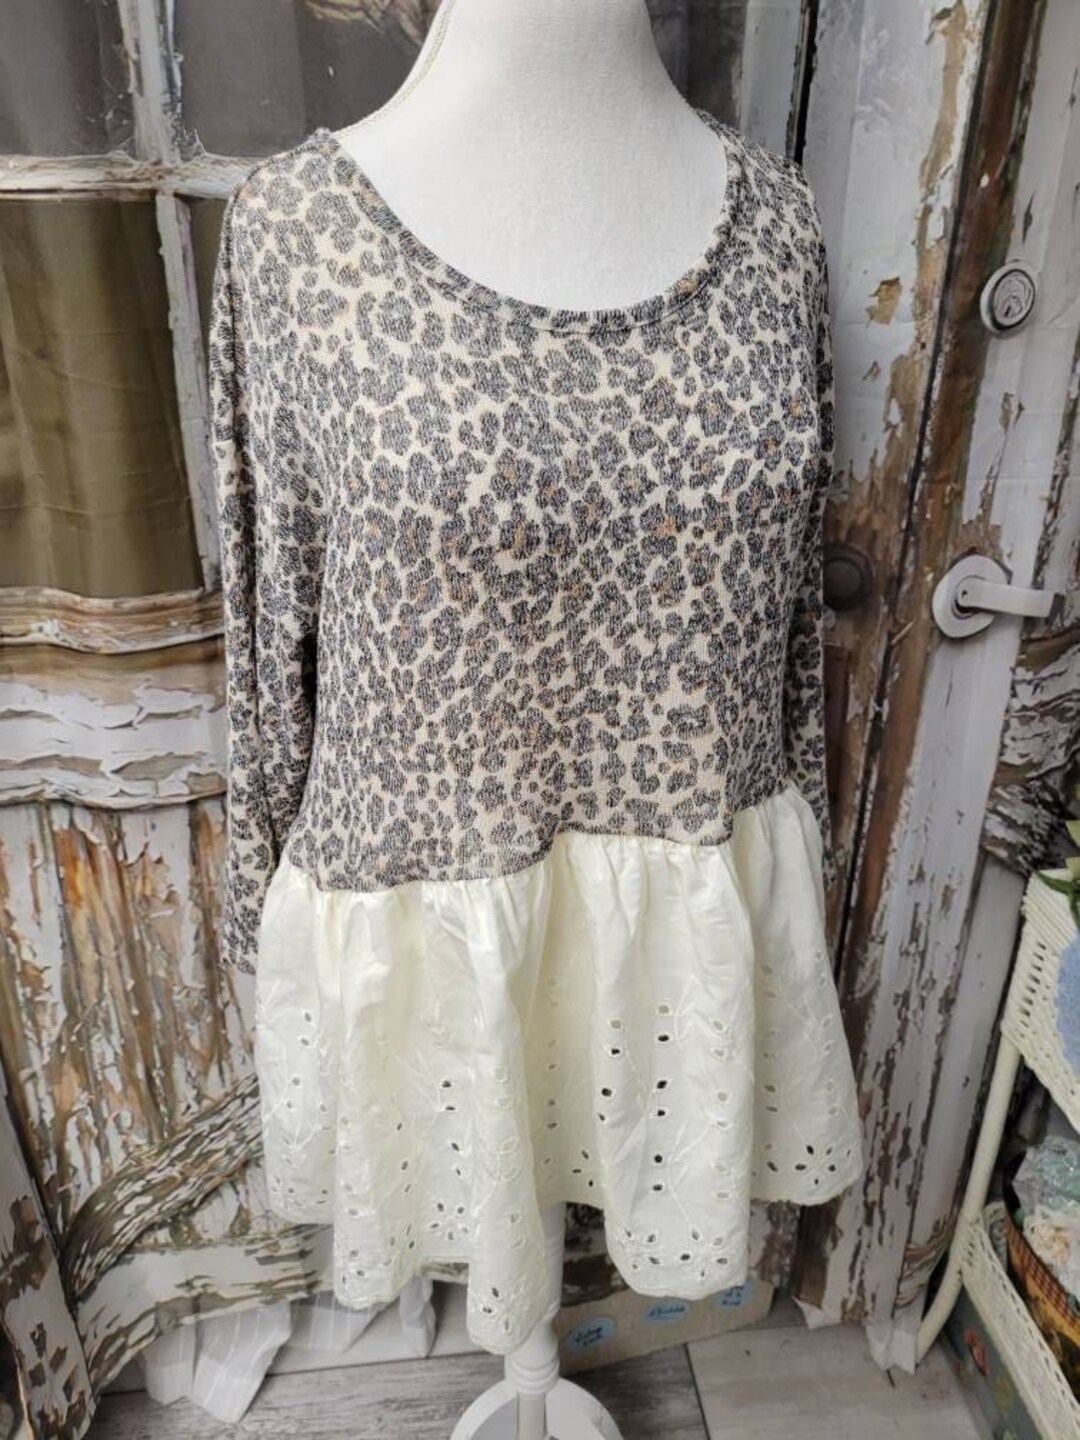 Cheetah Print and Eyelet Lace Upcycled Tunic Top Plus Size - Etsy